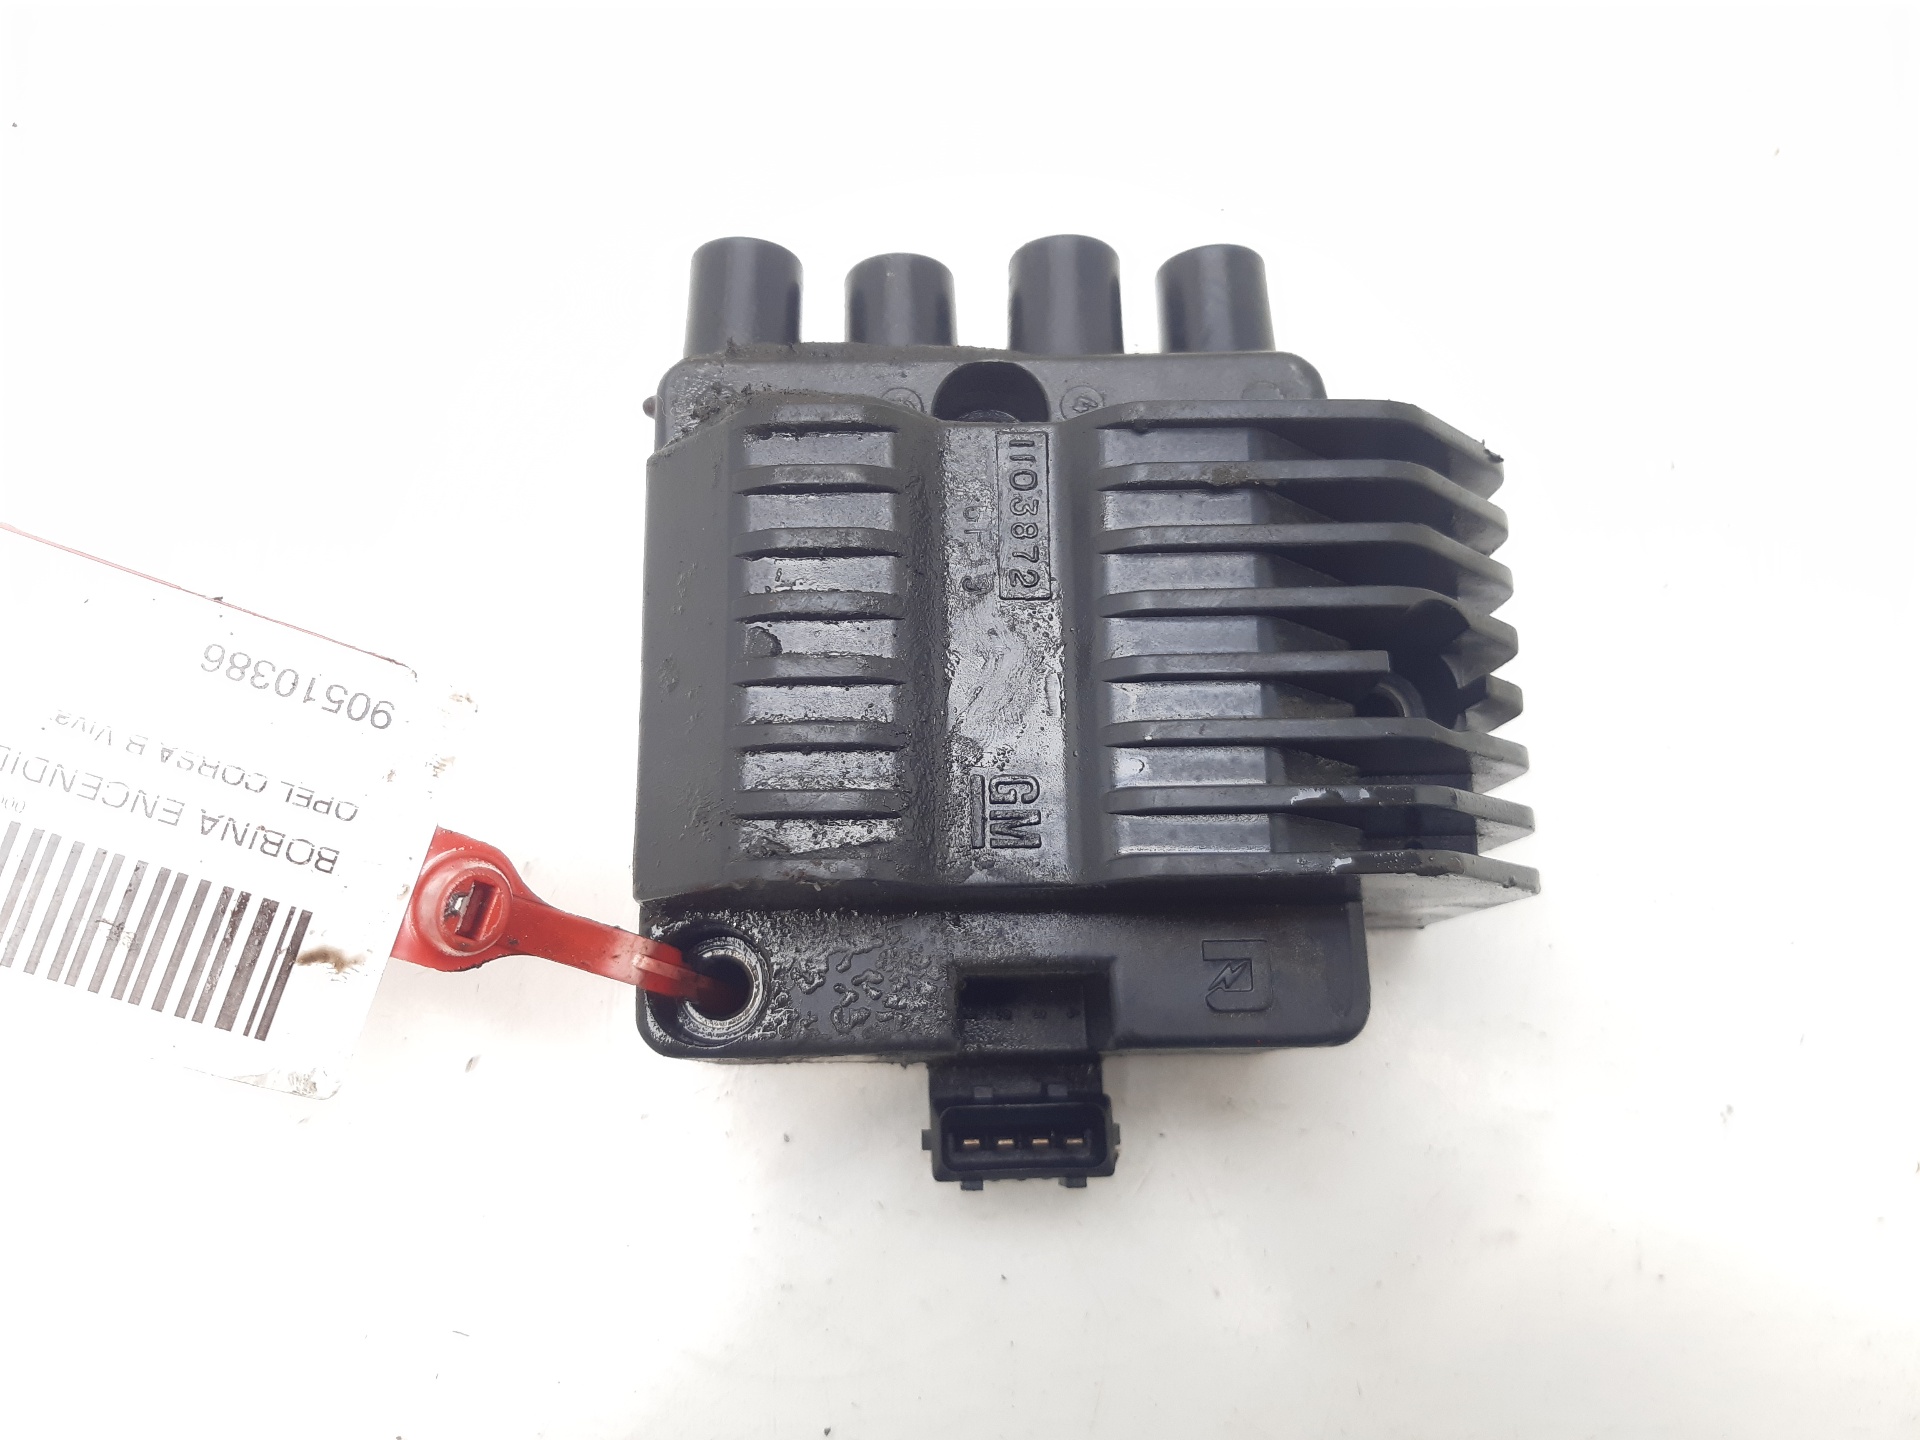 OPEL Corsa B (1993-2000) High Voltage Ignition Coil 90510386 23080758